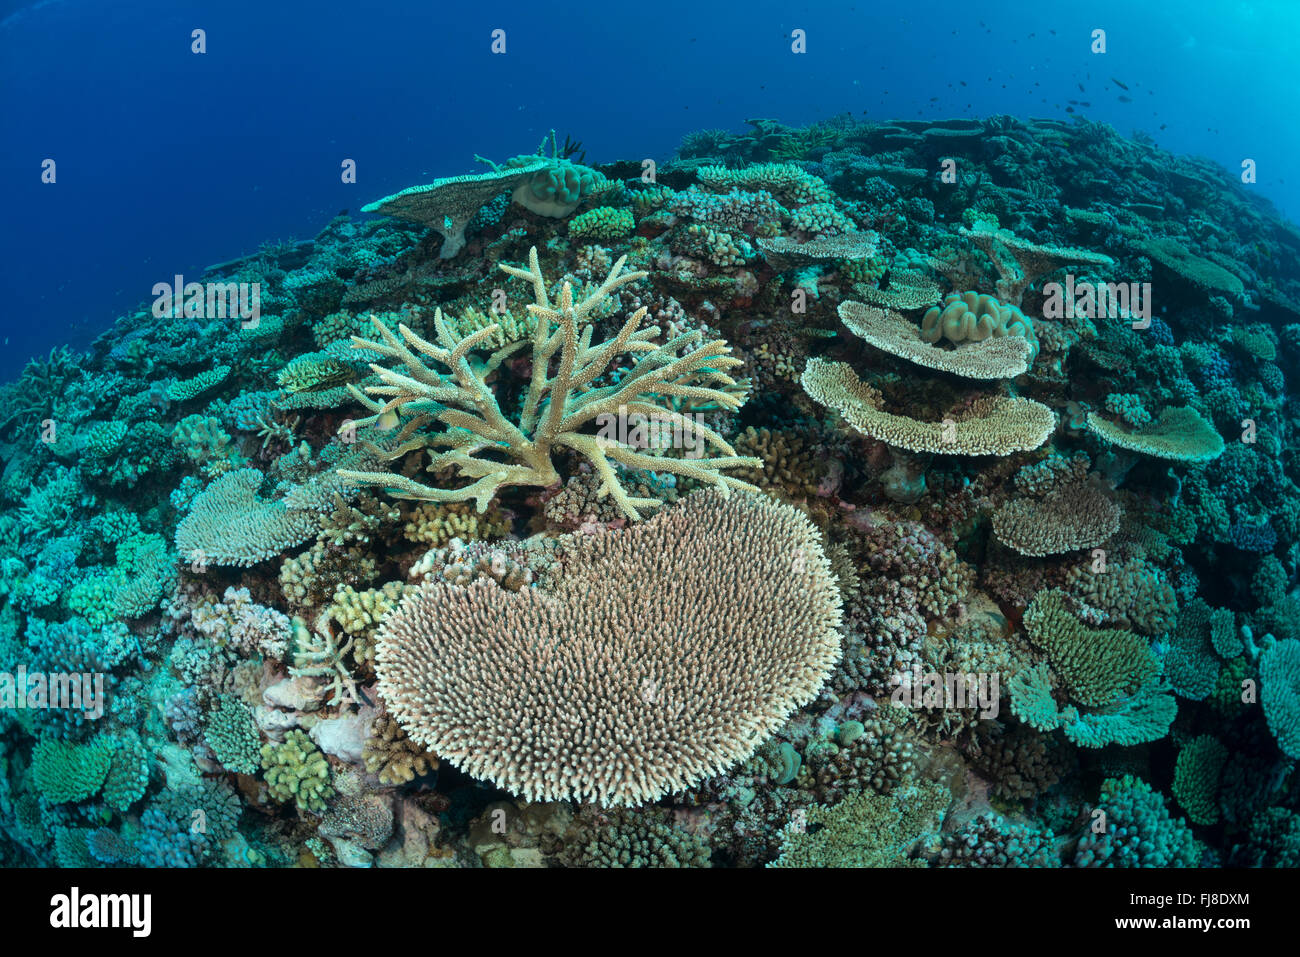 Very rich expansive acropora table coral field at the outer edge of the ...